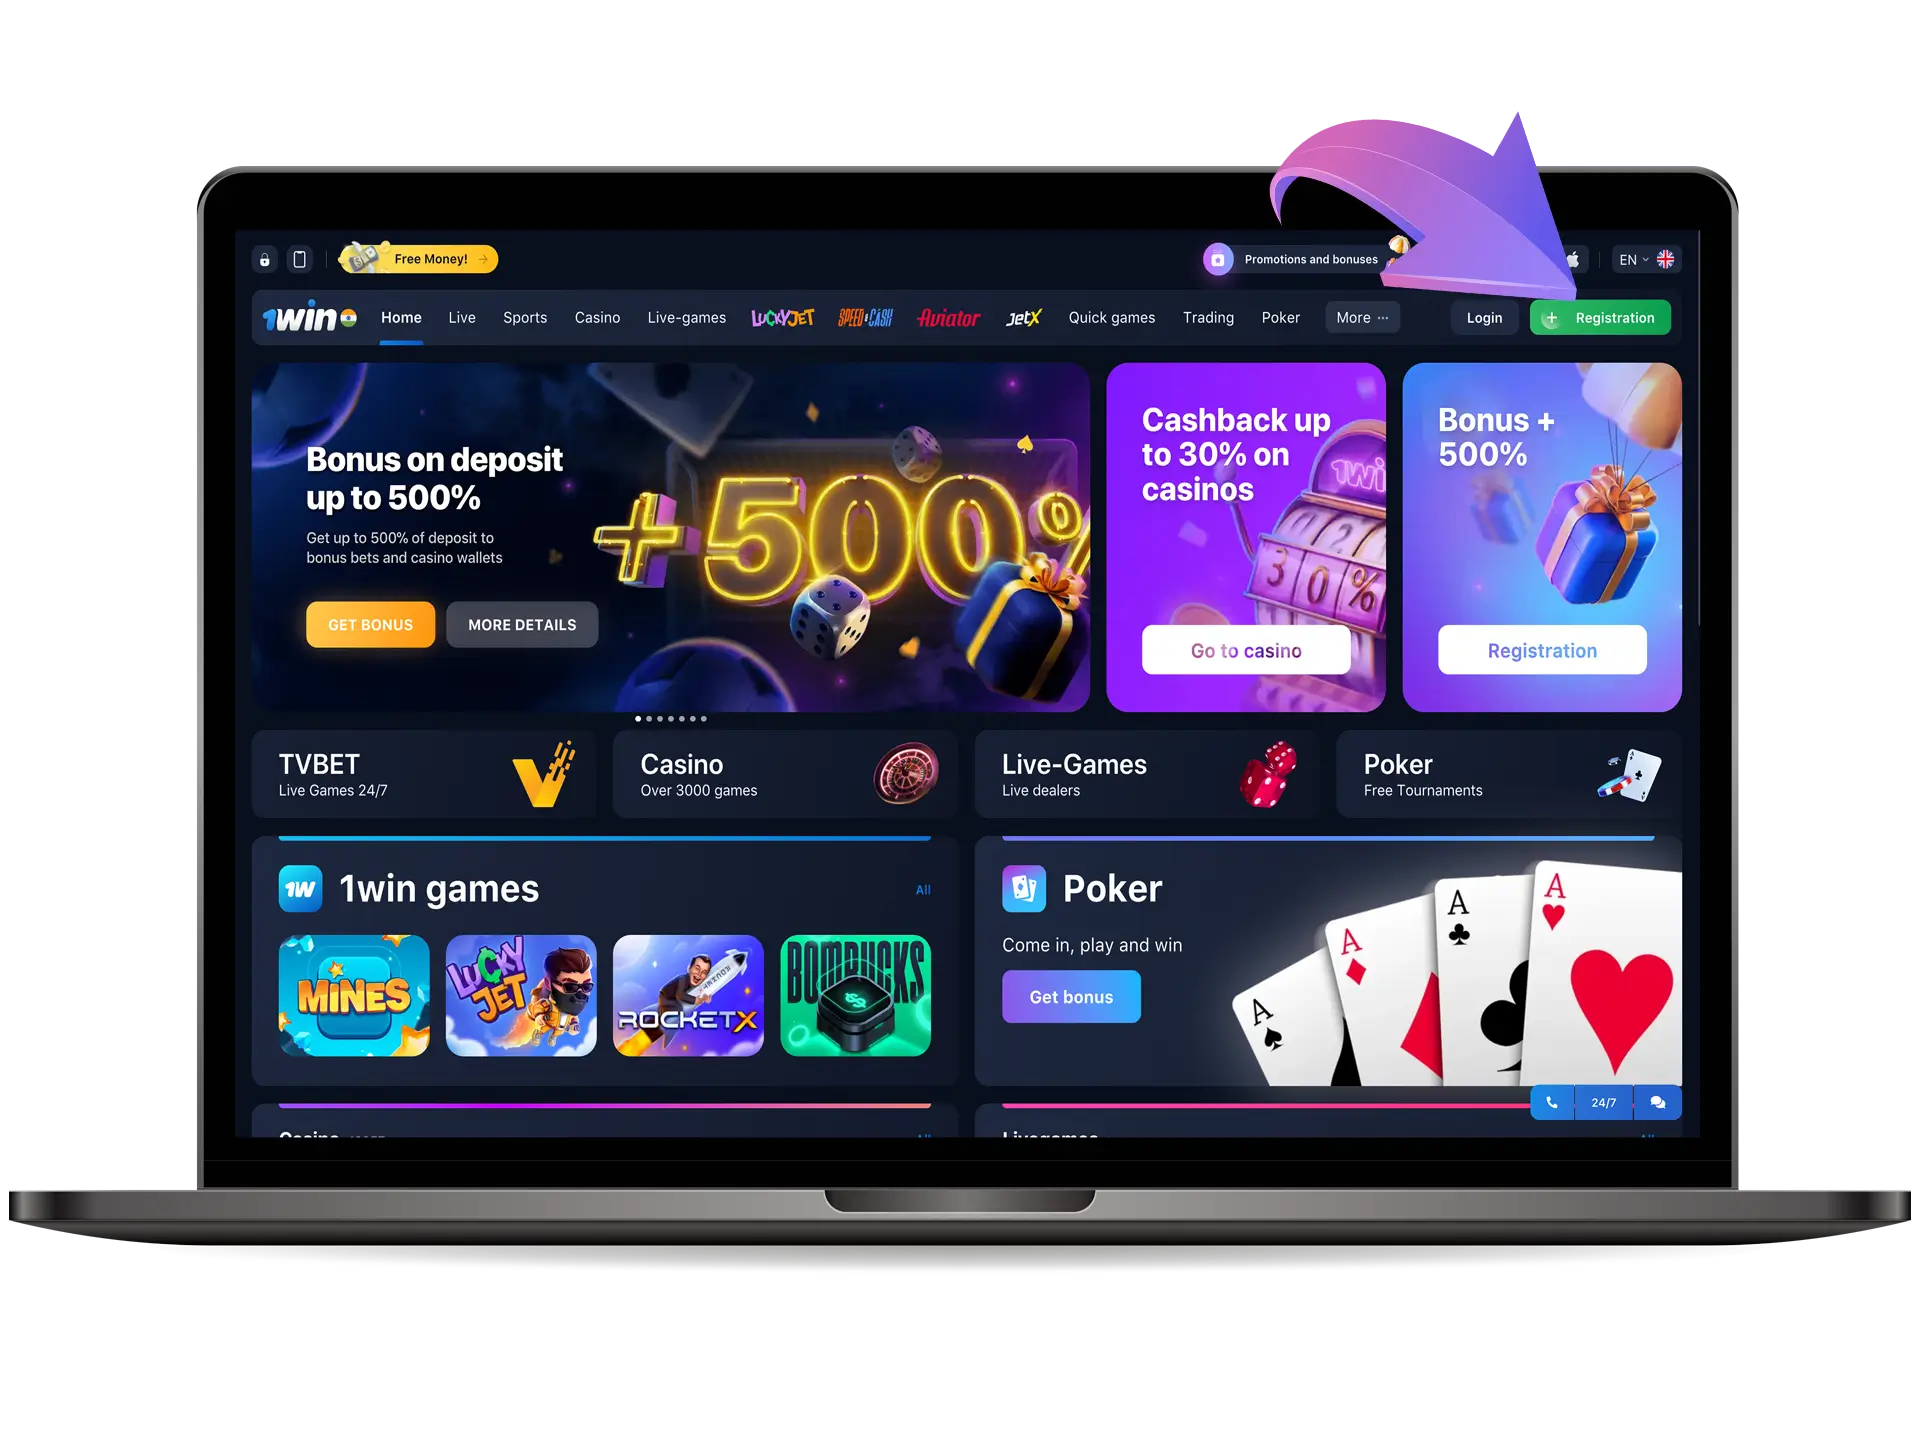 Proceed to sign up for an account at 1Win Casino.